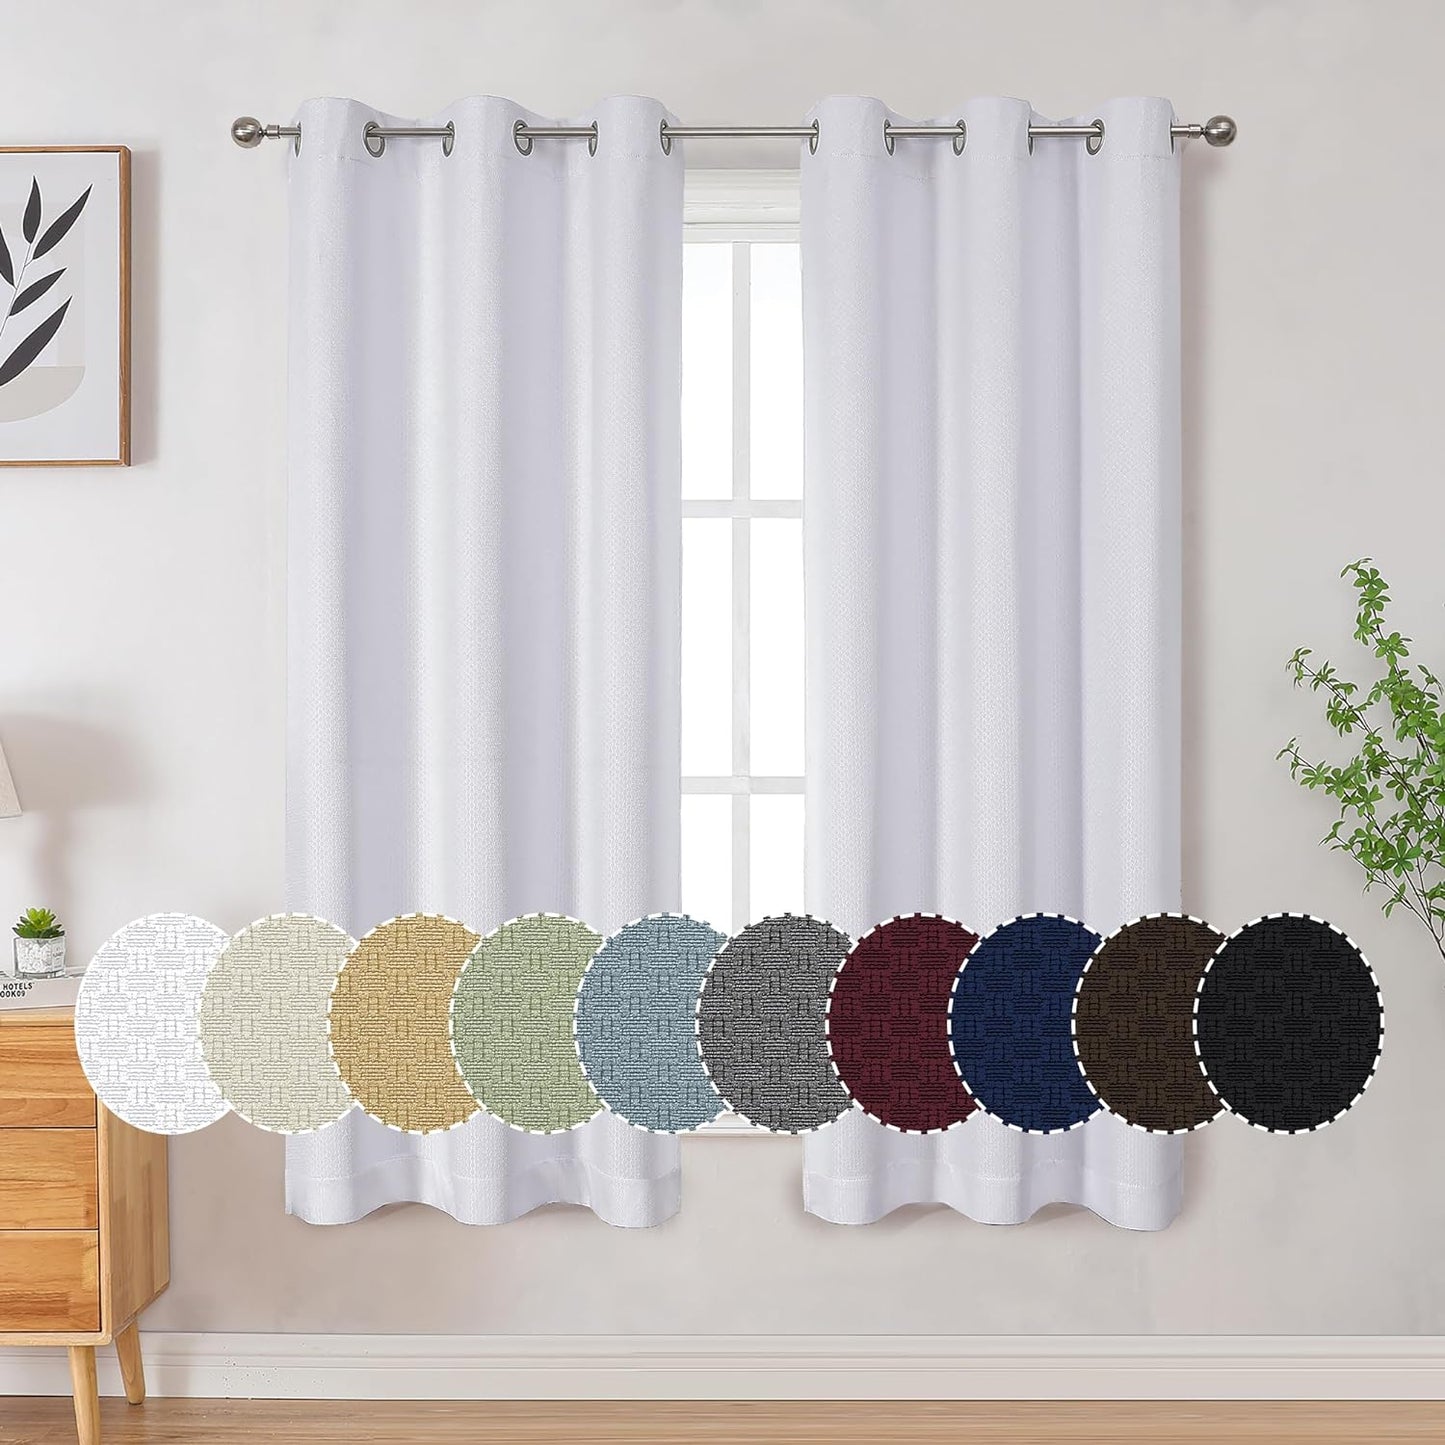 OVZME 100% Black Out Curtains 63 Inch Long 2 Panel Sets for Living Room, Completely Blackout Bedroom Drapes Textured Thermal Insulated Warm Fleece for Winter, Grommet Top, 42W X 63L, Sky Blue  OVZME White 42W X 63L Inch X 2 Panels 